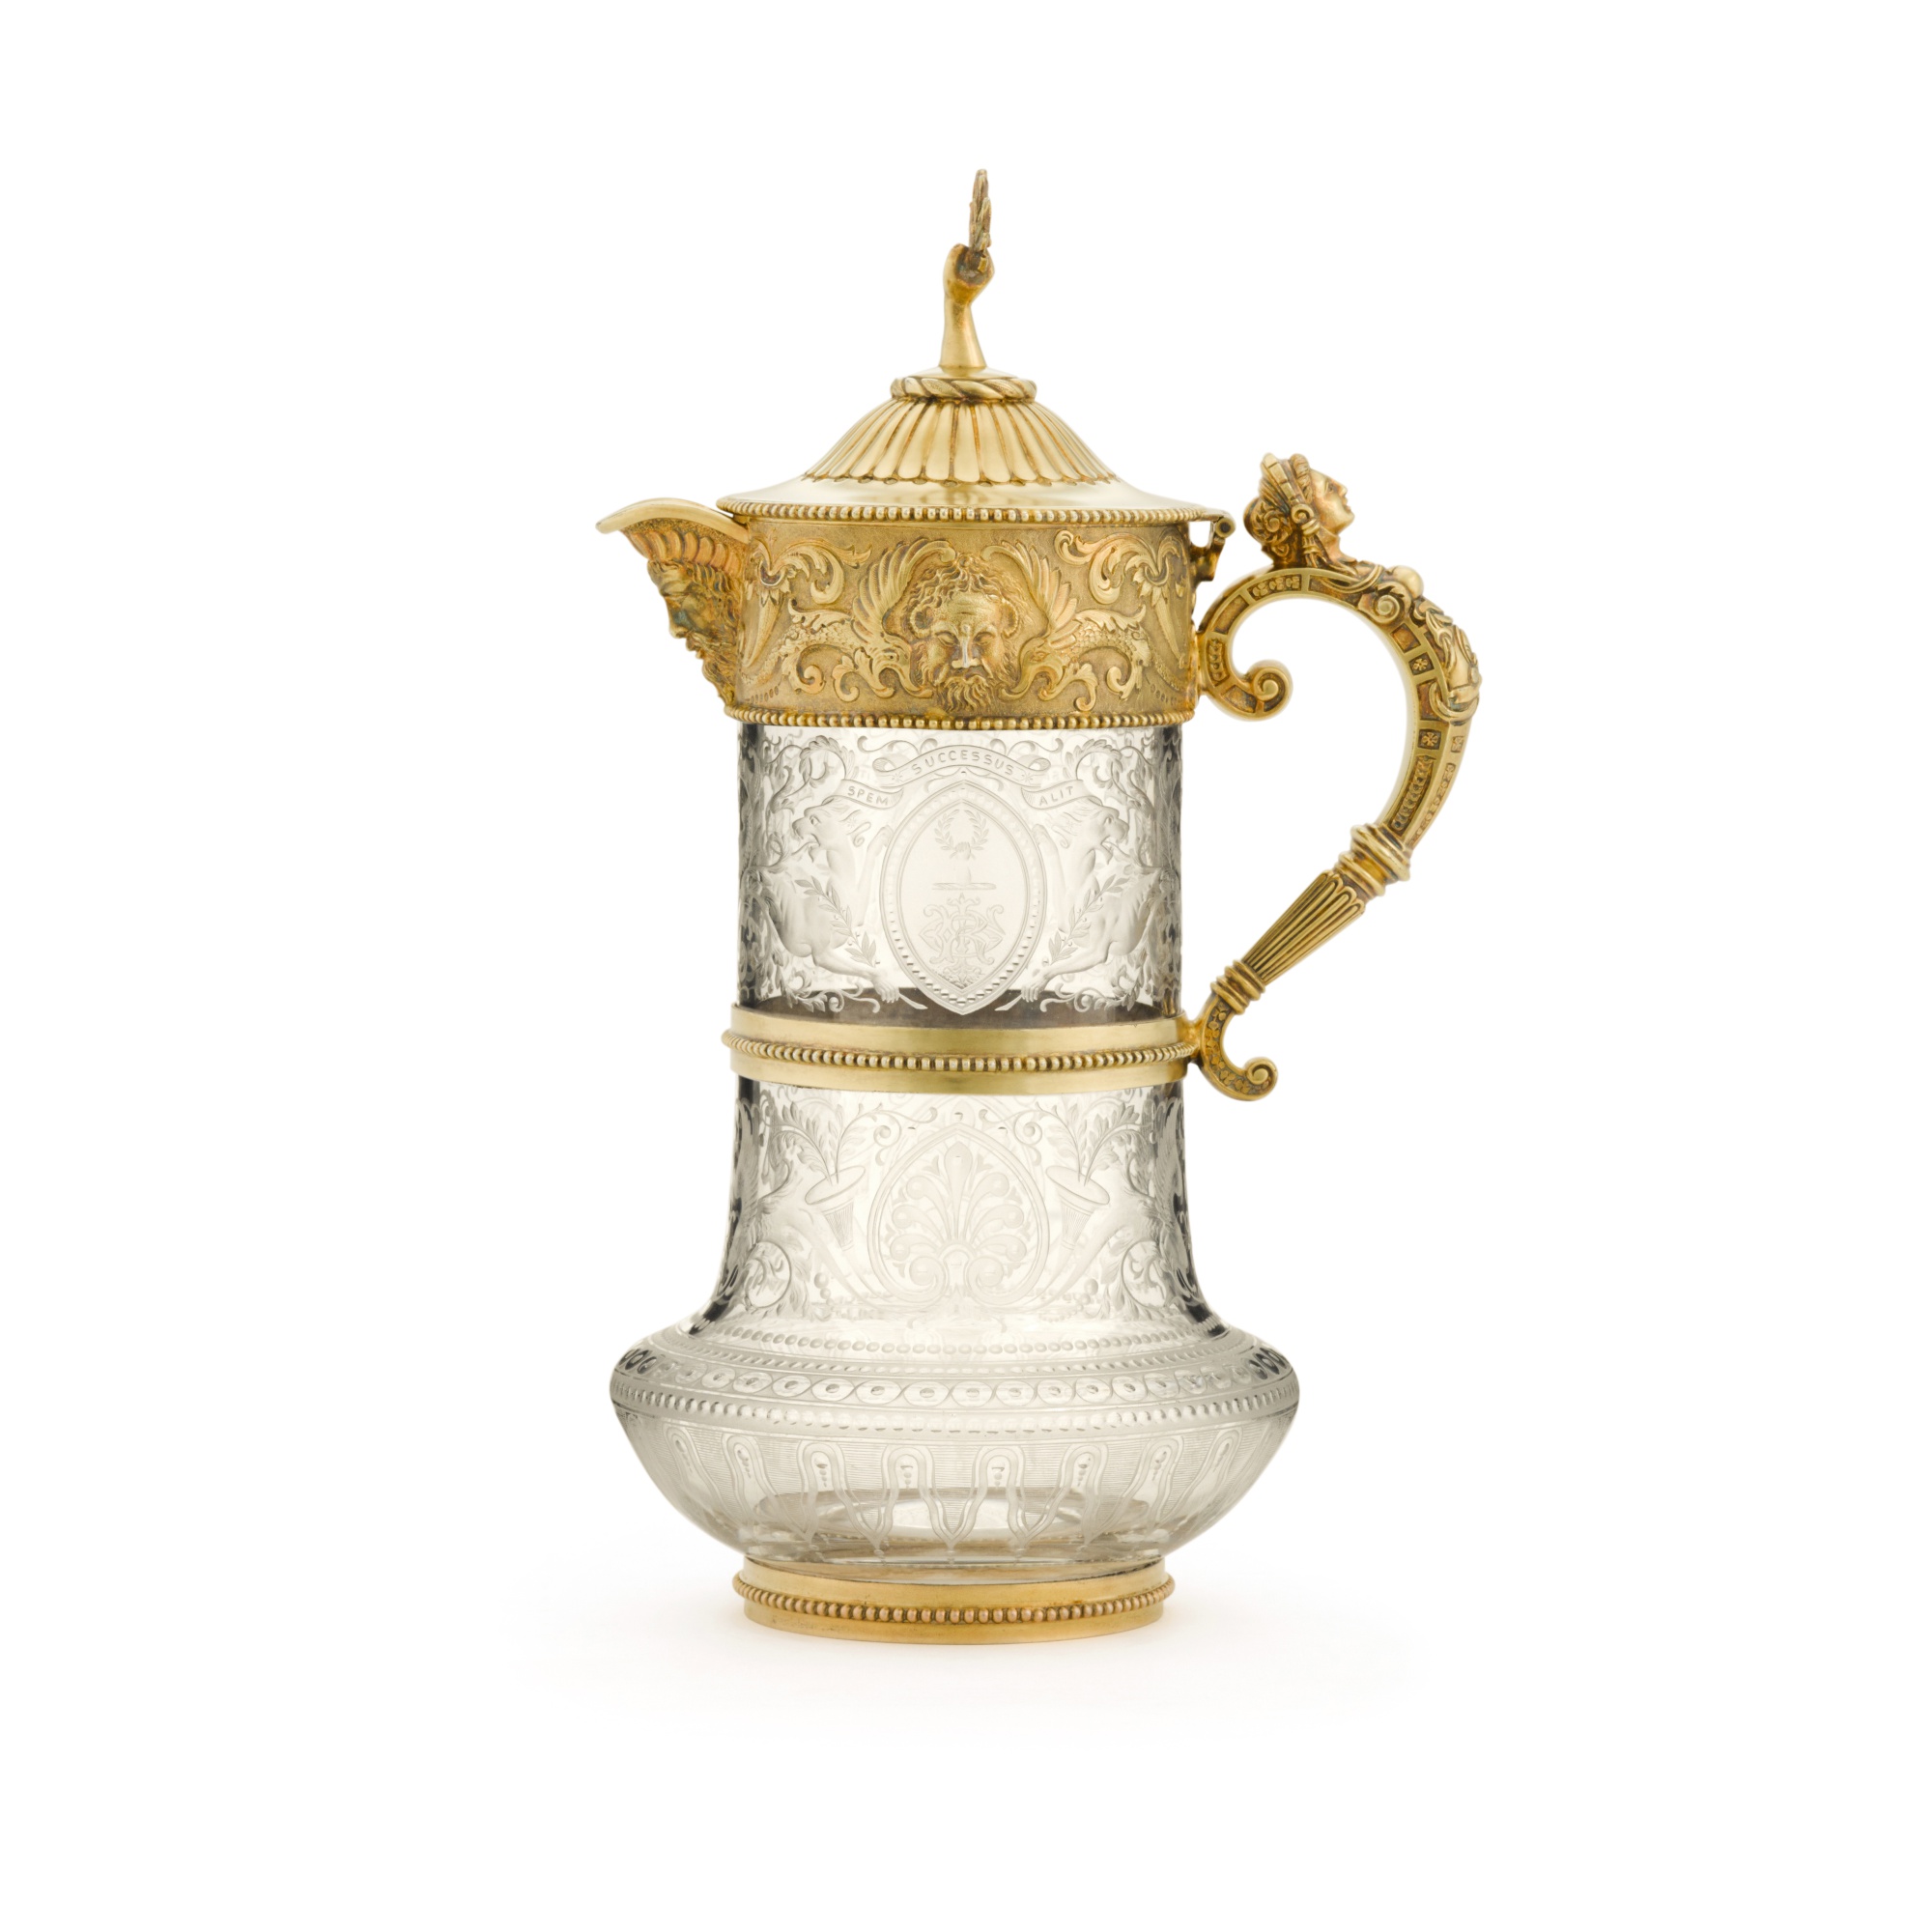 A Victorian silver-gilt-mounted glass claret jug, William & George Sissons, Sheffield, 1869 - Image 4 of 5